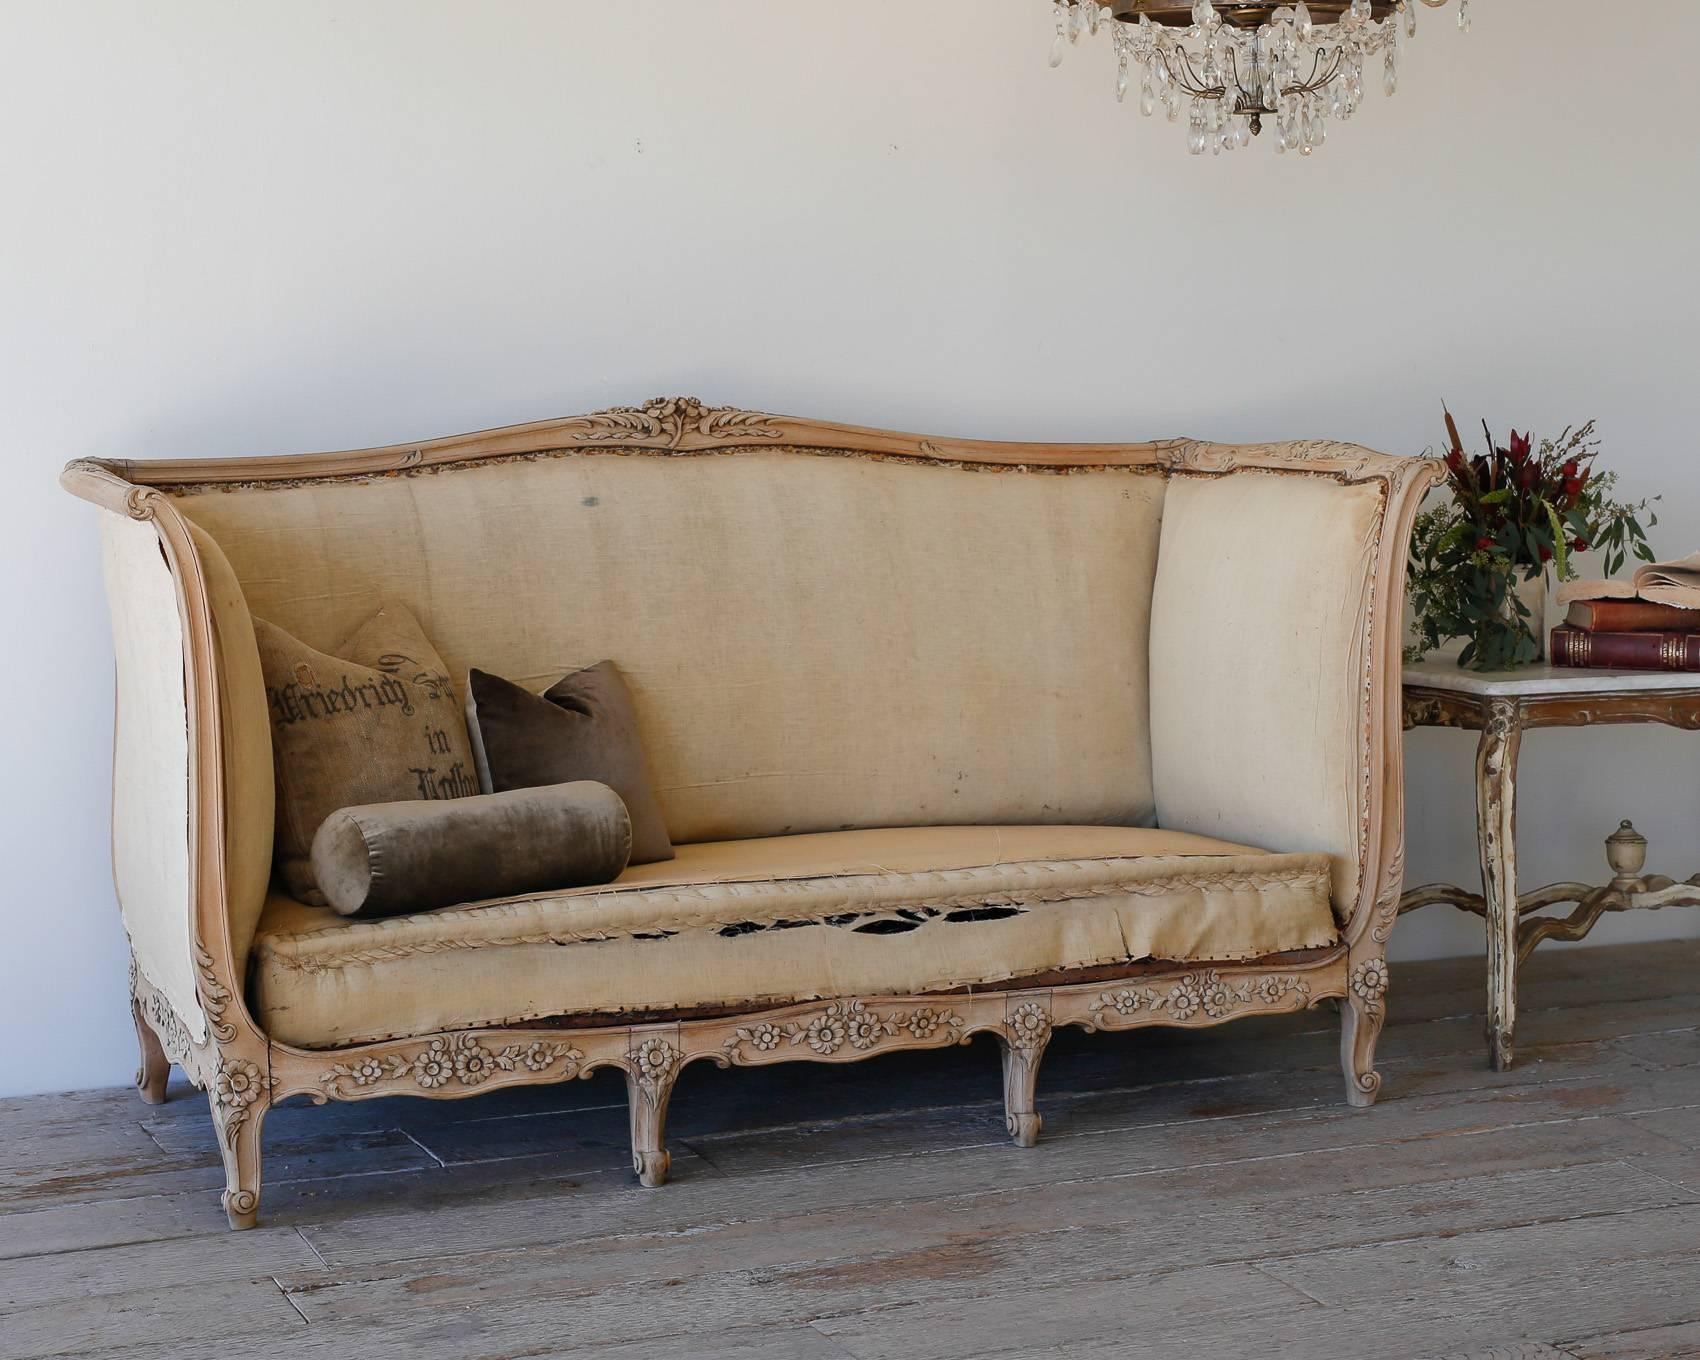 Incredible high-backed Louis XV daybed in a soft, bleached oak finish. Gorgeous floral details adorn each arm and crest while subtle curves of the frame add romance to this large-scale piece. The daybed has beens tripped back to its original muslin